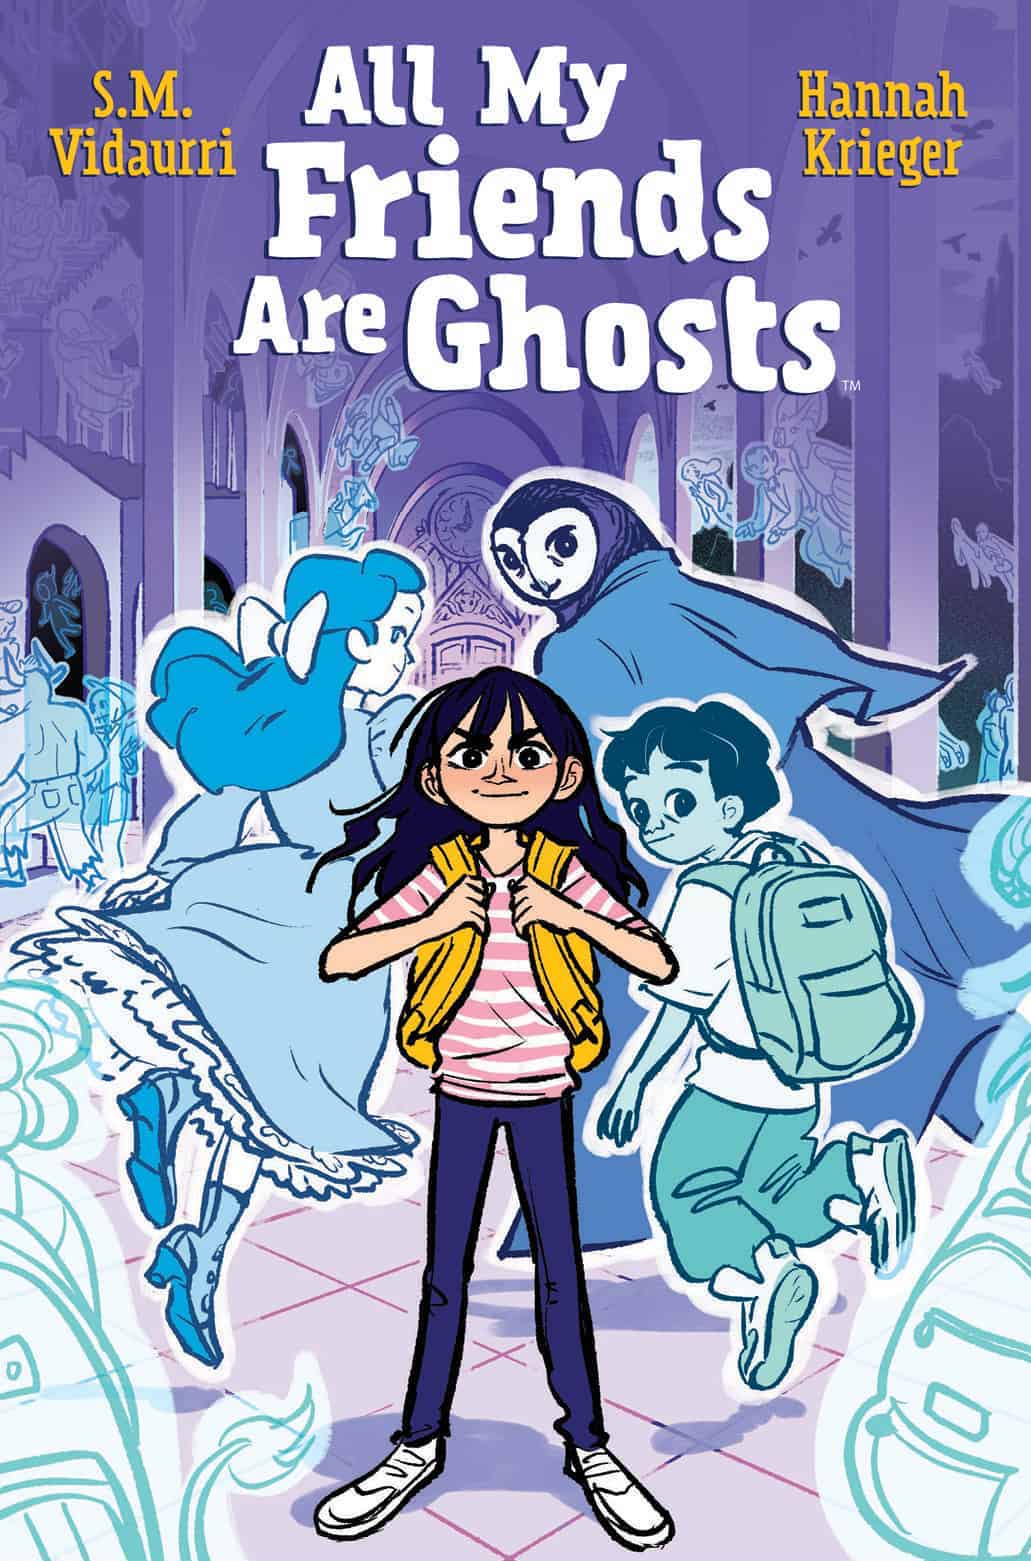 Graphic Novels for Winter 2020: All My Friends Are Ghosts